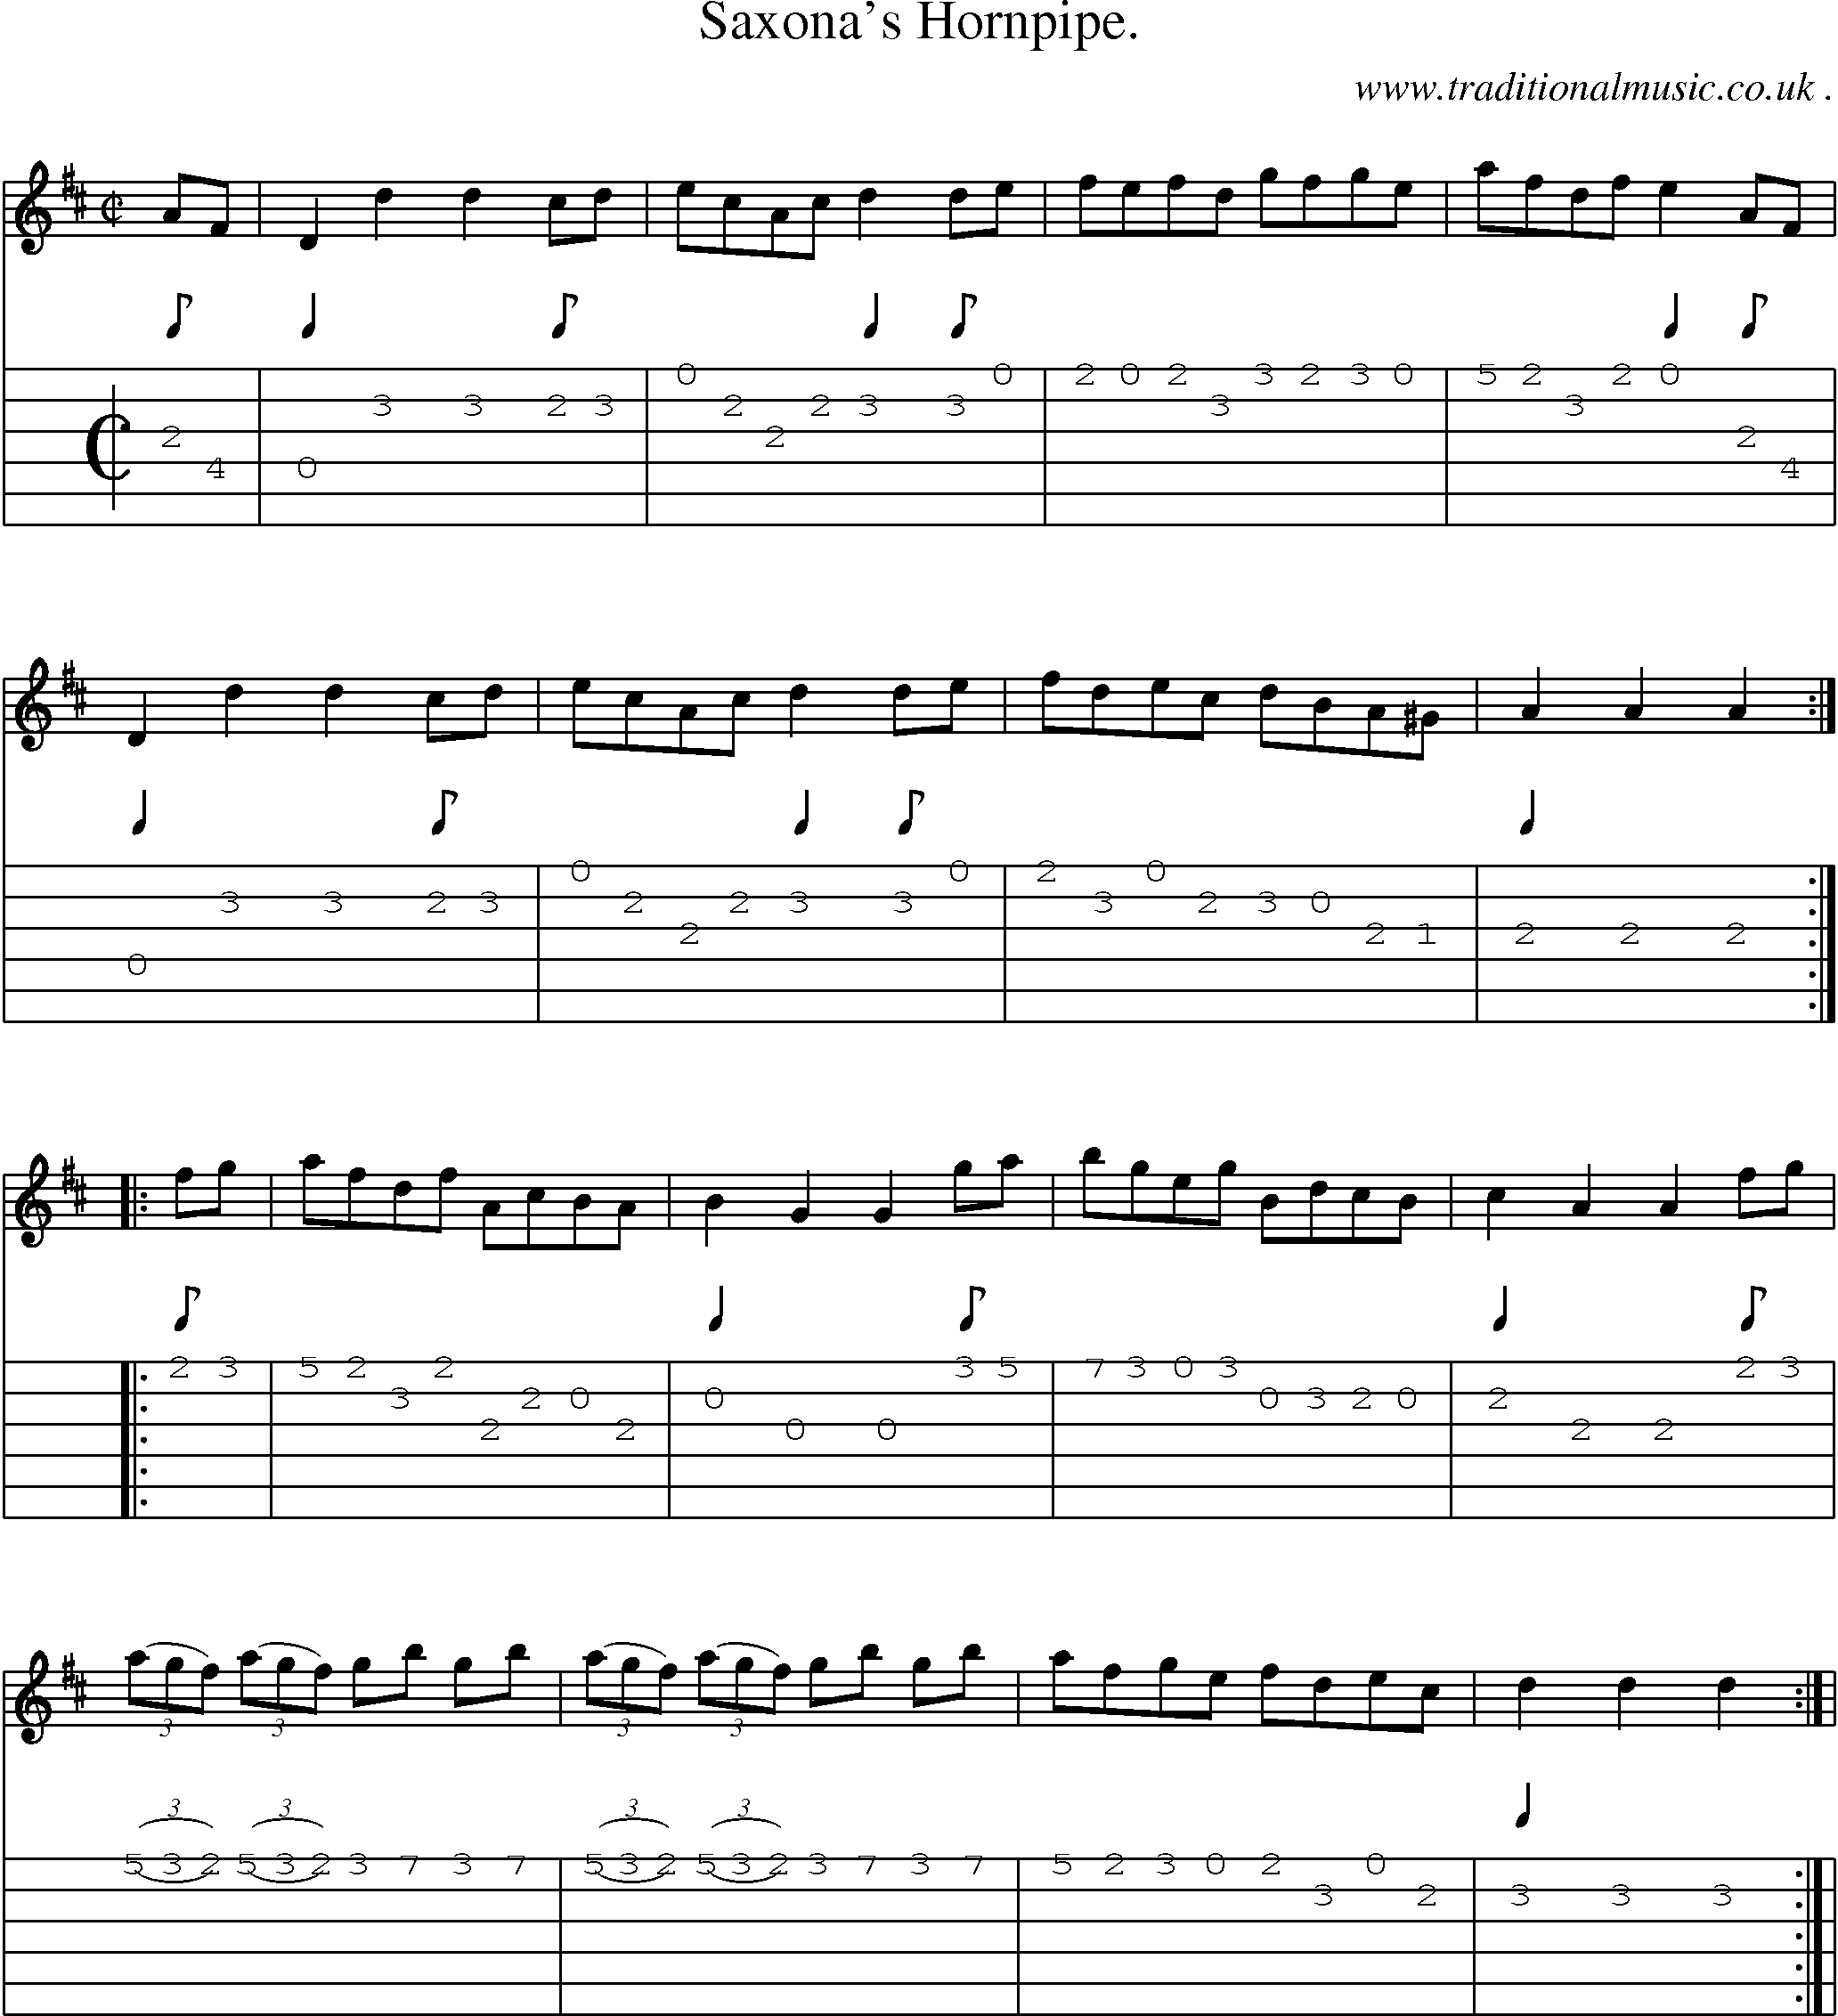 Sheet-Music and Guitar Tabs for Saxonas Hornpipe